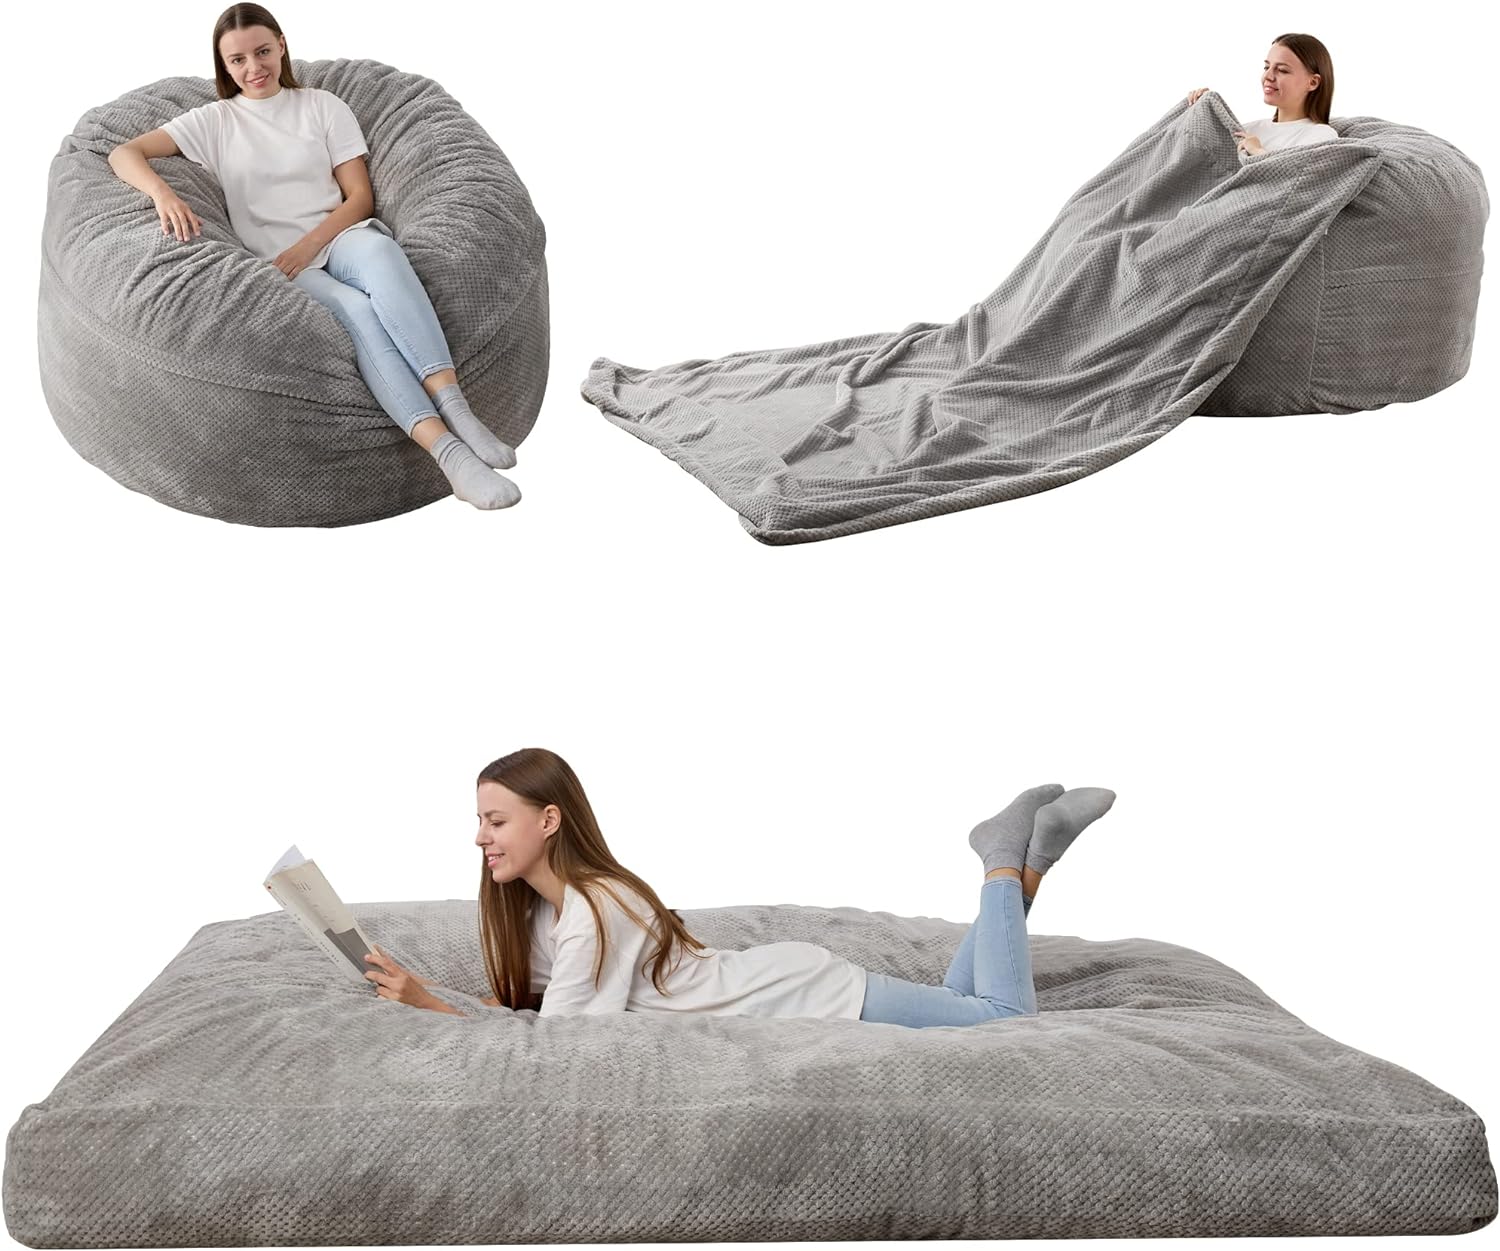 HABUTWAY Bean Bag Chair, Giant Bean Bag Chair with Washable Chenille Cover Ultra Soft, Convertible Bean Bag from Chair to Mattress, Huge Chenille Bean Bags for Adult, Couples, Family - Grey Queen